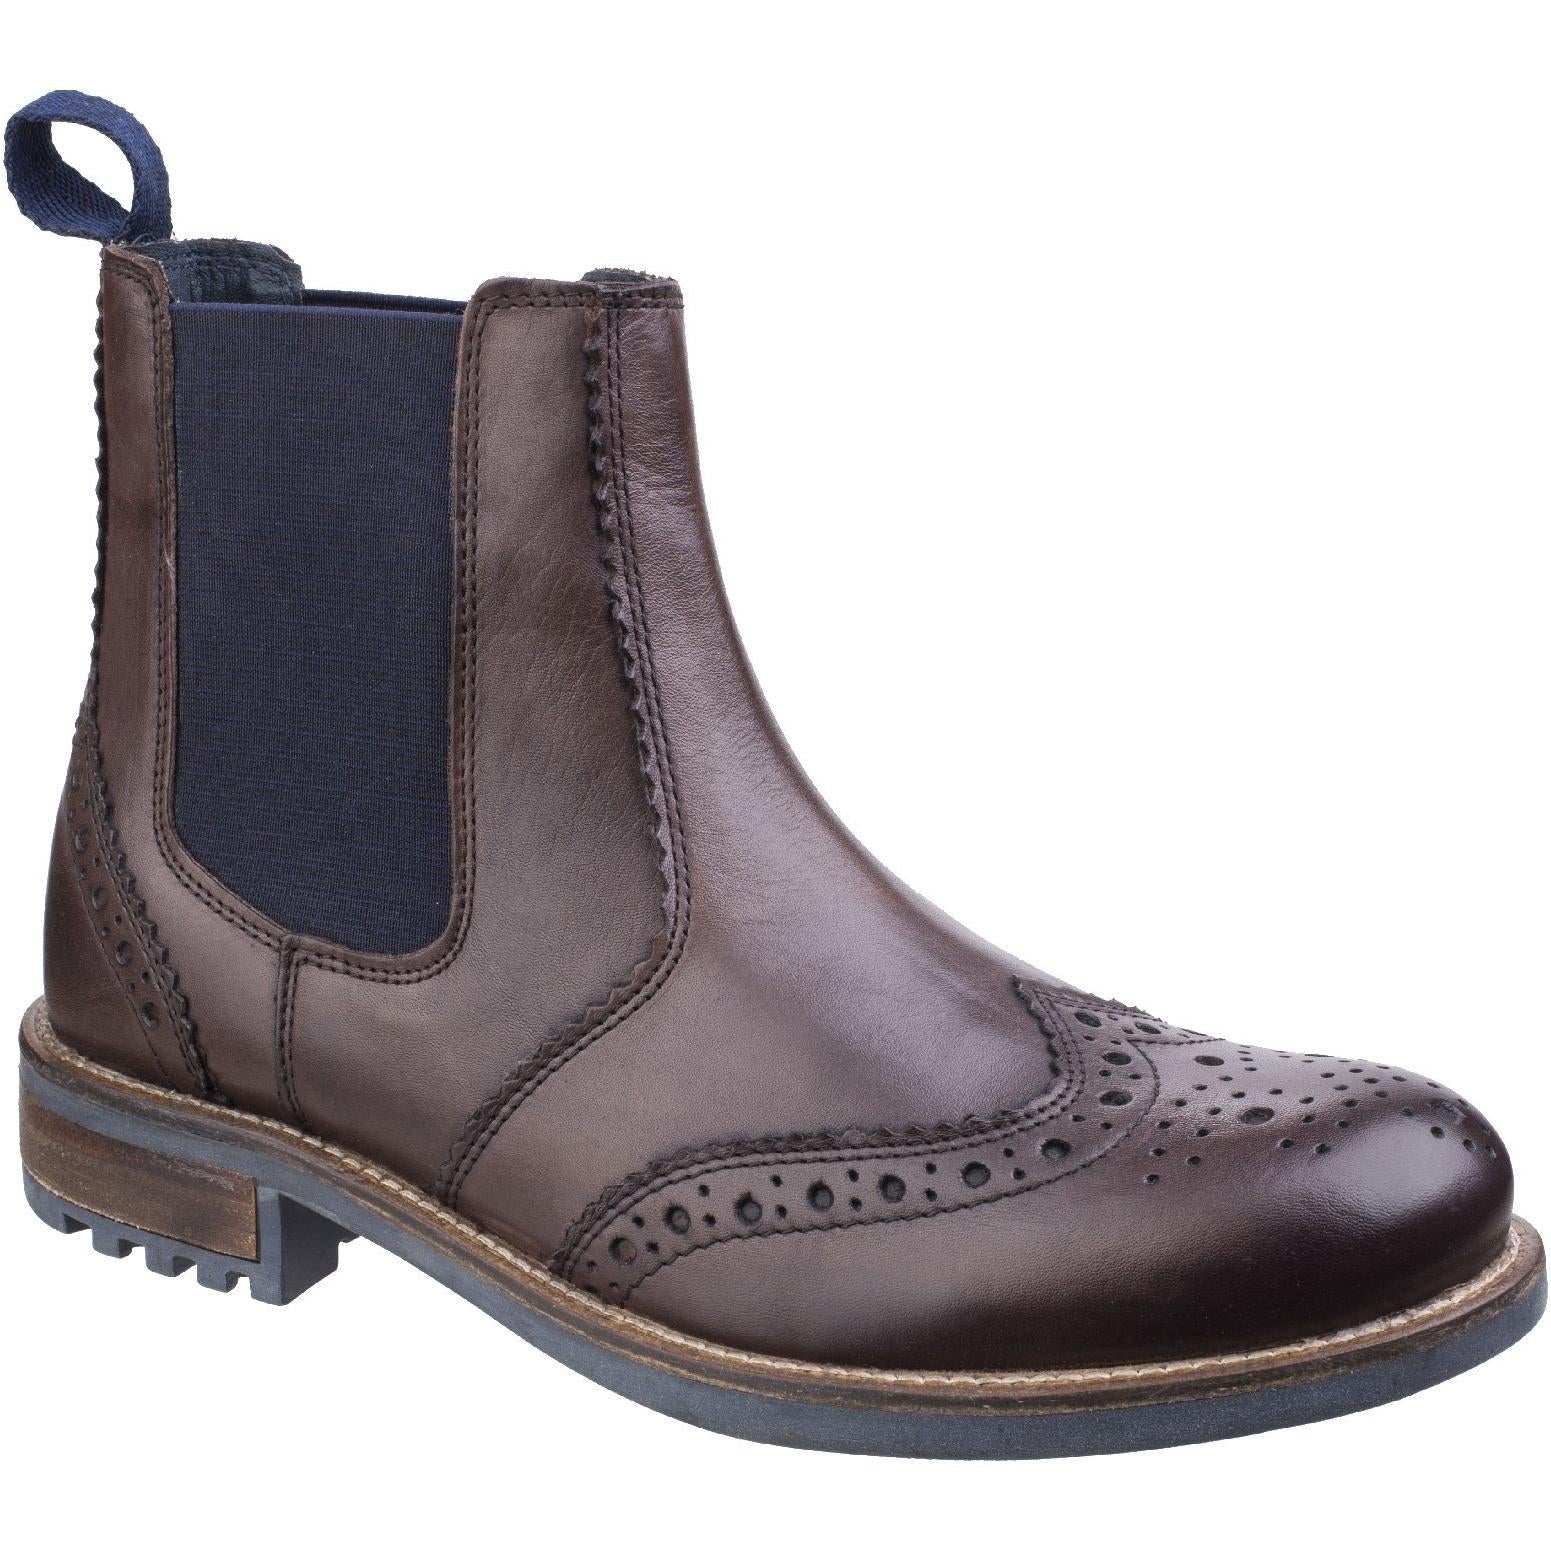 Cotswold Cirencester Chelsea Brogue Boots